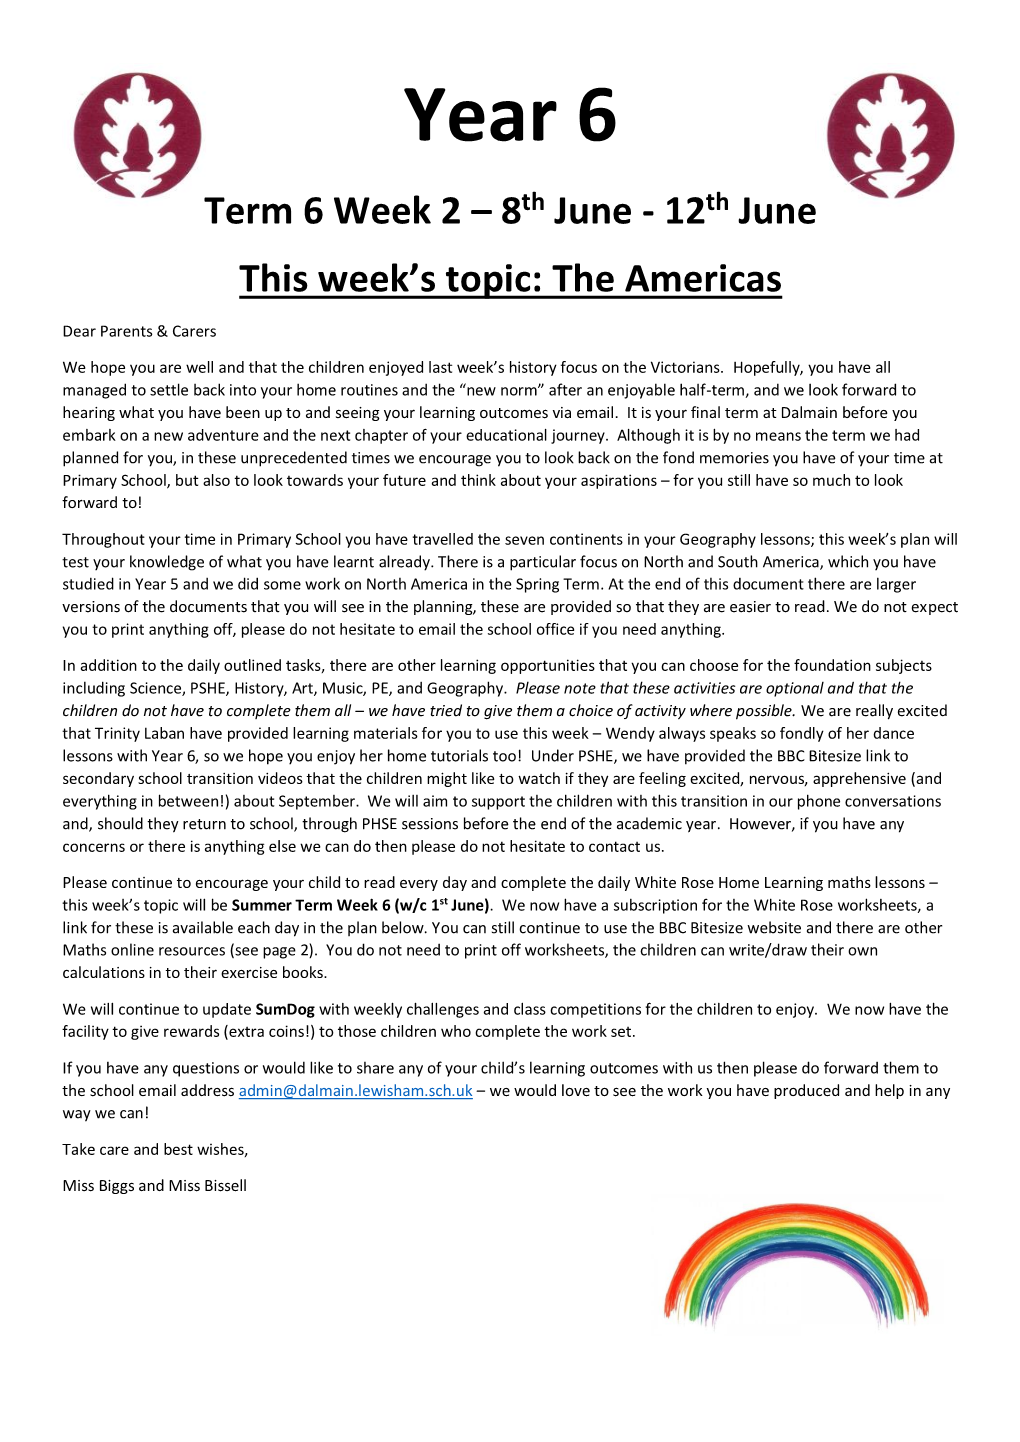 Year 6 Term 6 Week 2 – 8Th June - 12Th June This Week’S Topic: the Americas